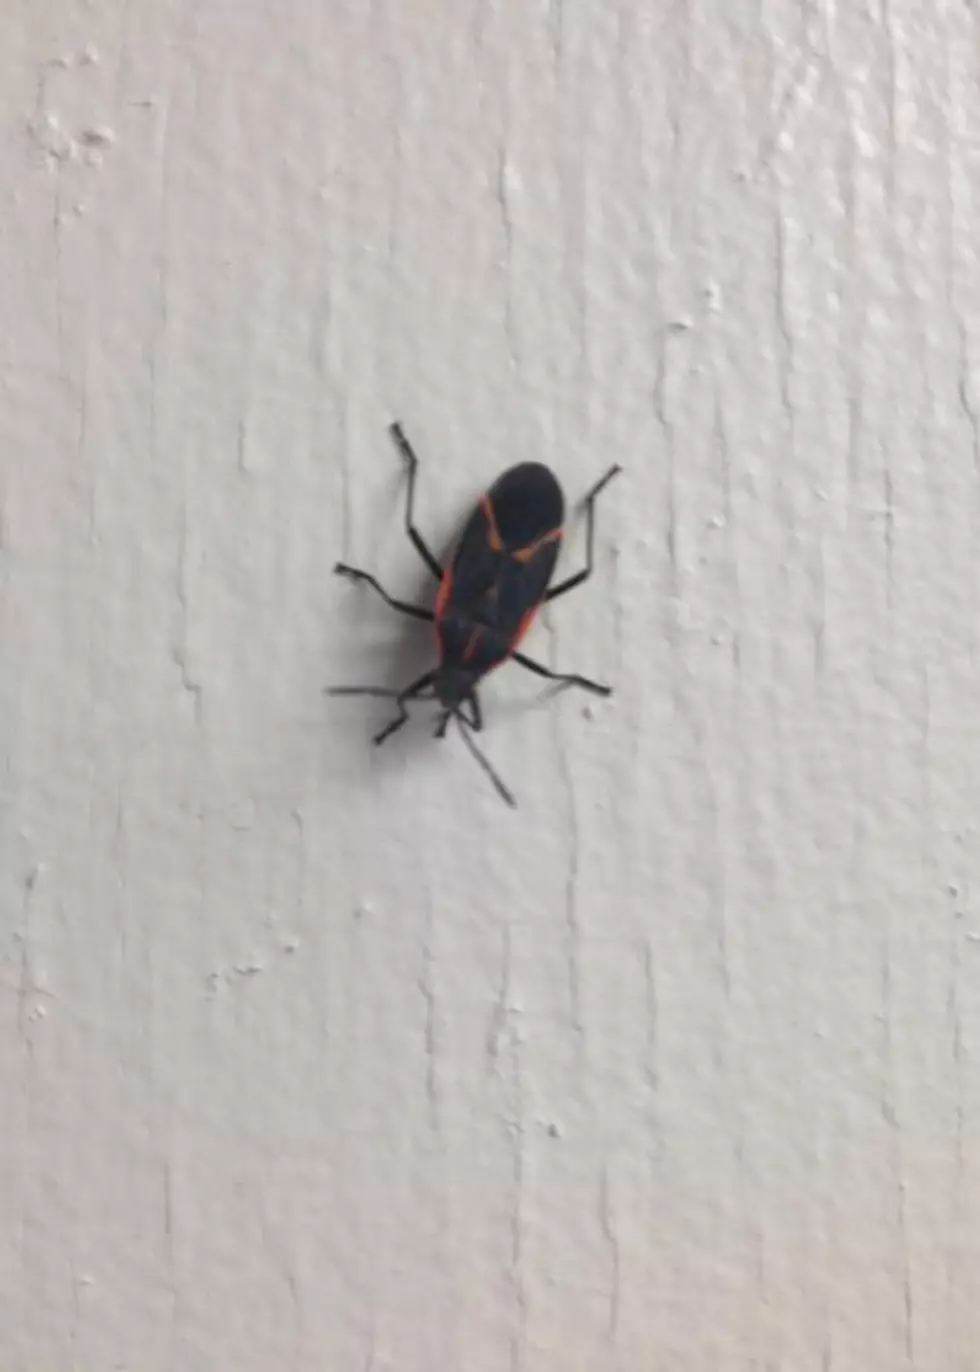 How to prevent and deal with Boxelder bugs in your home.